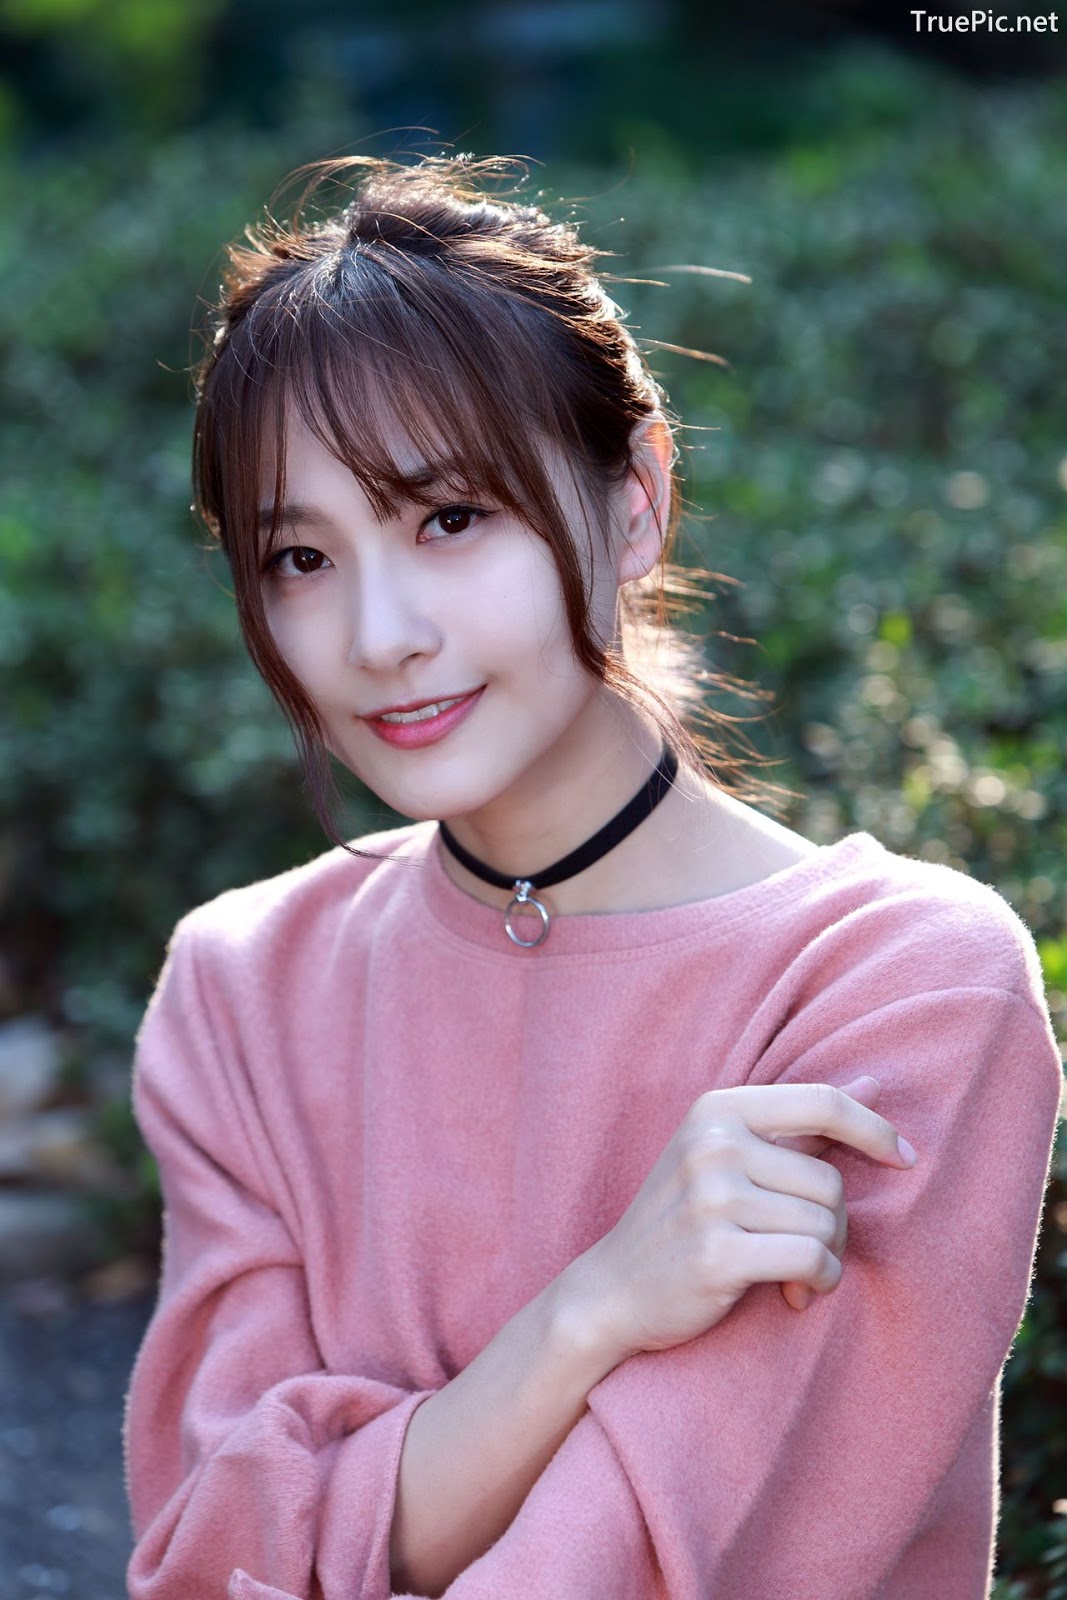 Image-Taiwanese-Model-郭思敏-Pure-And-Gorgeous-Girl-In-Pink-Sweater-Dress-TruePic.net- Picture-47